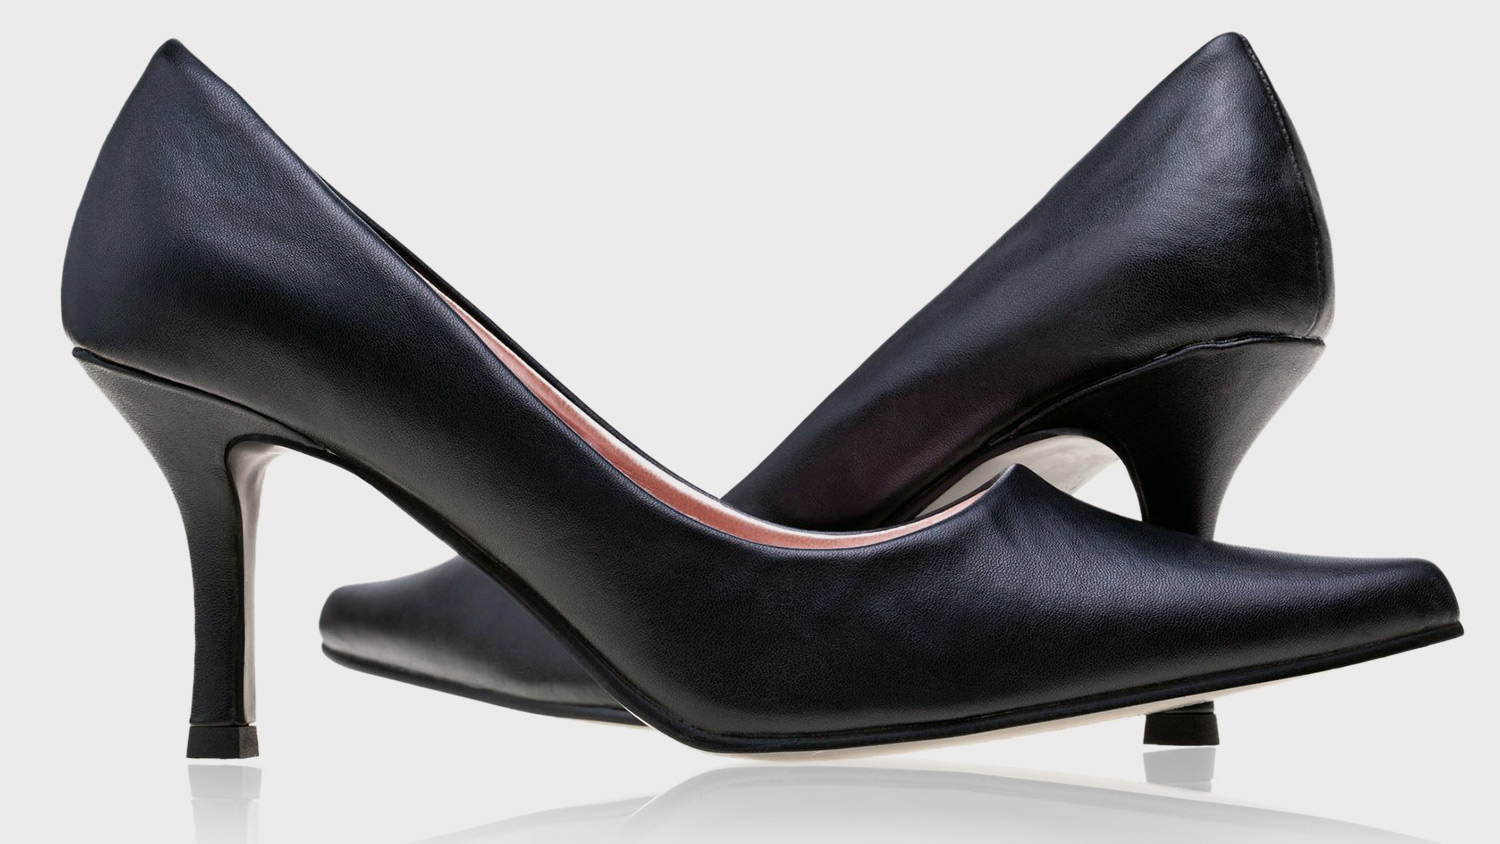 A pair of high-heeled shoes